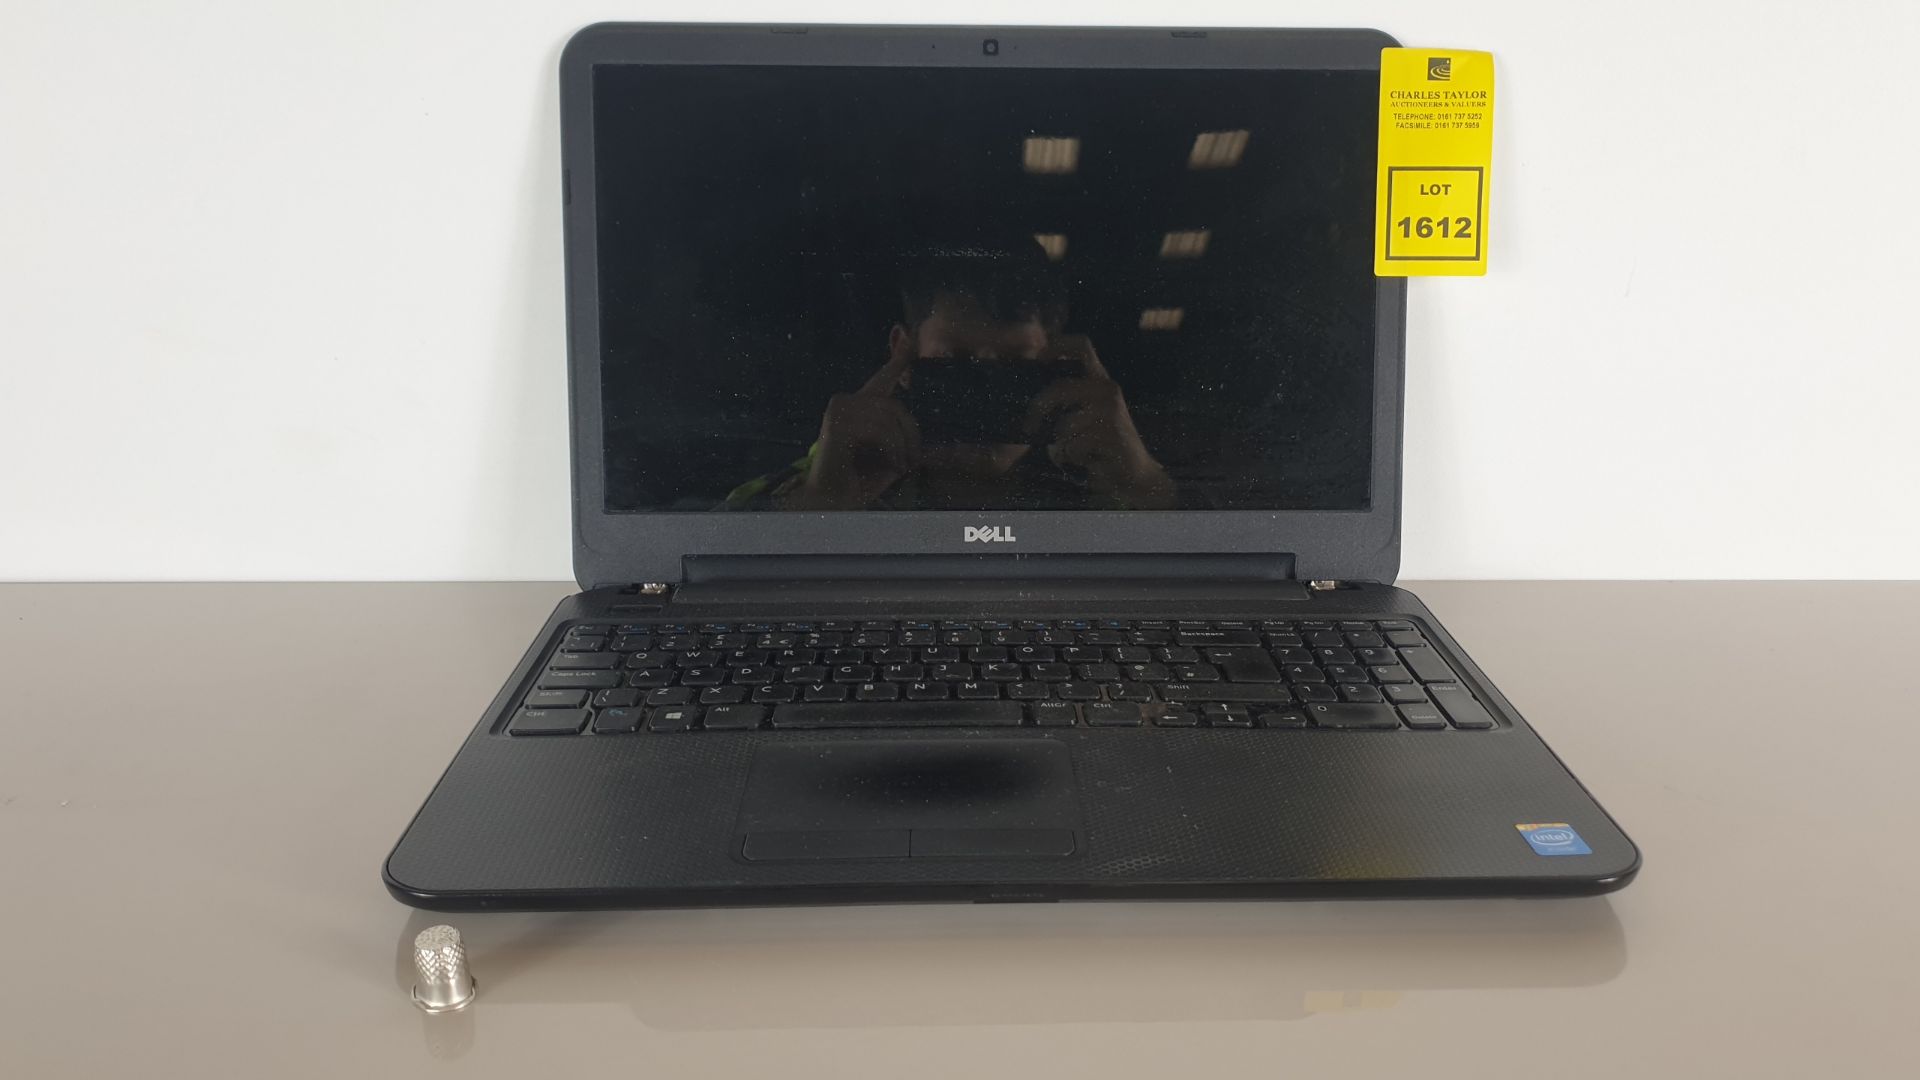 (LOT FOR THURSDAY 28TH MAY AUCTION) DELL INSPIRON 3531 LAPTOP - 750 GB HARD DRIVE, 15.6" SCREEN WITH